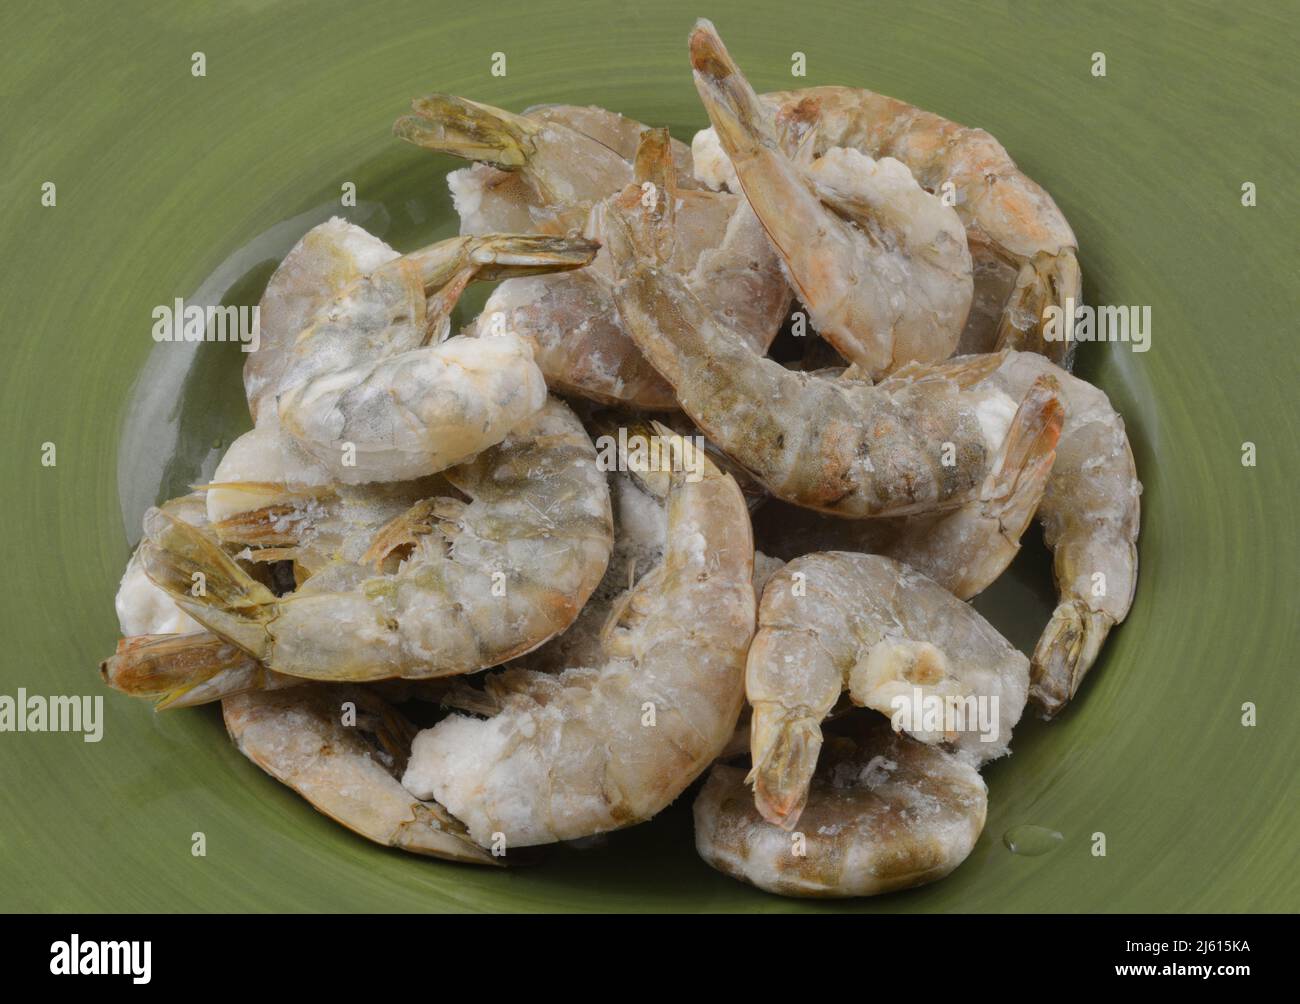 Freezer burned shrimp in the shell coated with ice crystals from improper packaging or refrigeration thawing on green plate Stock Photo